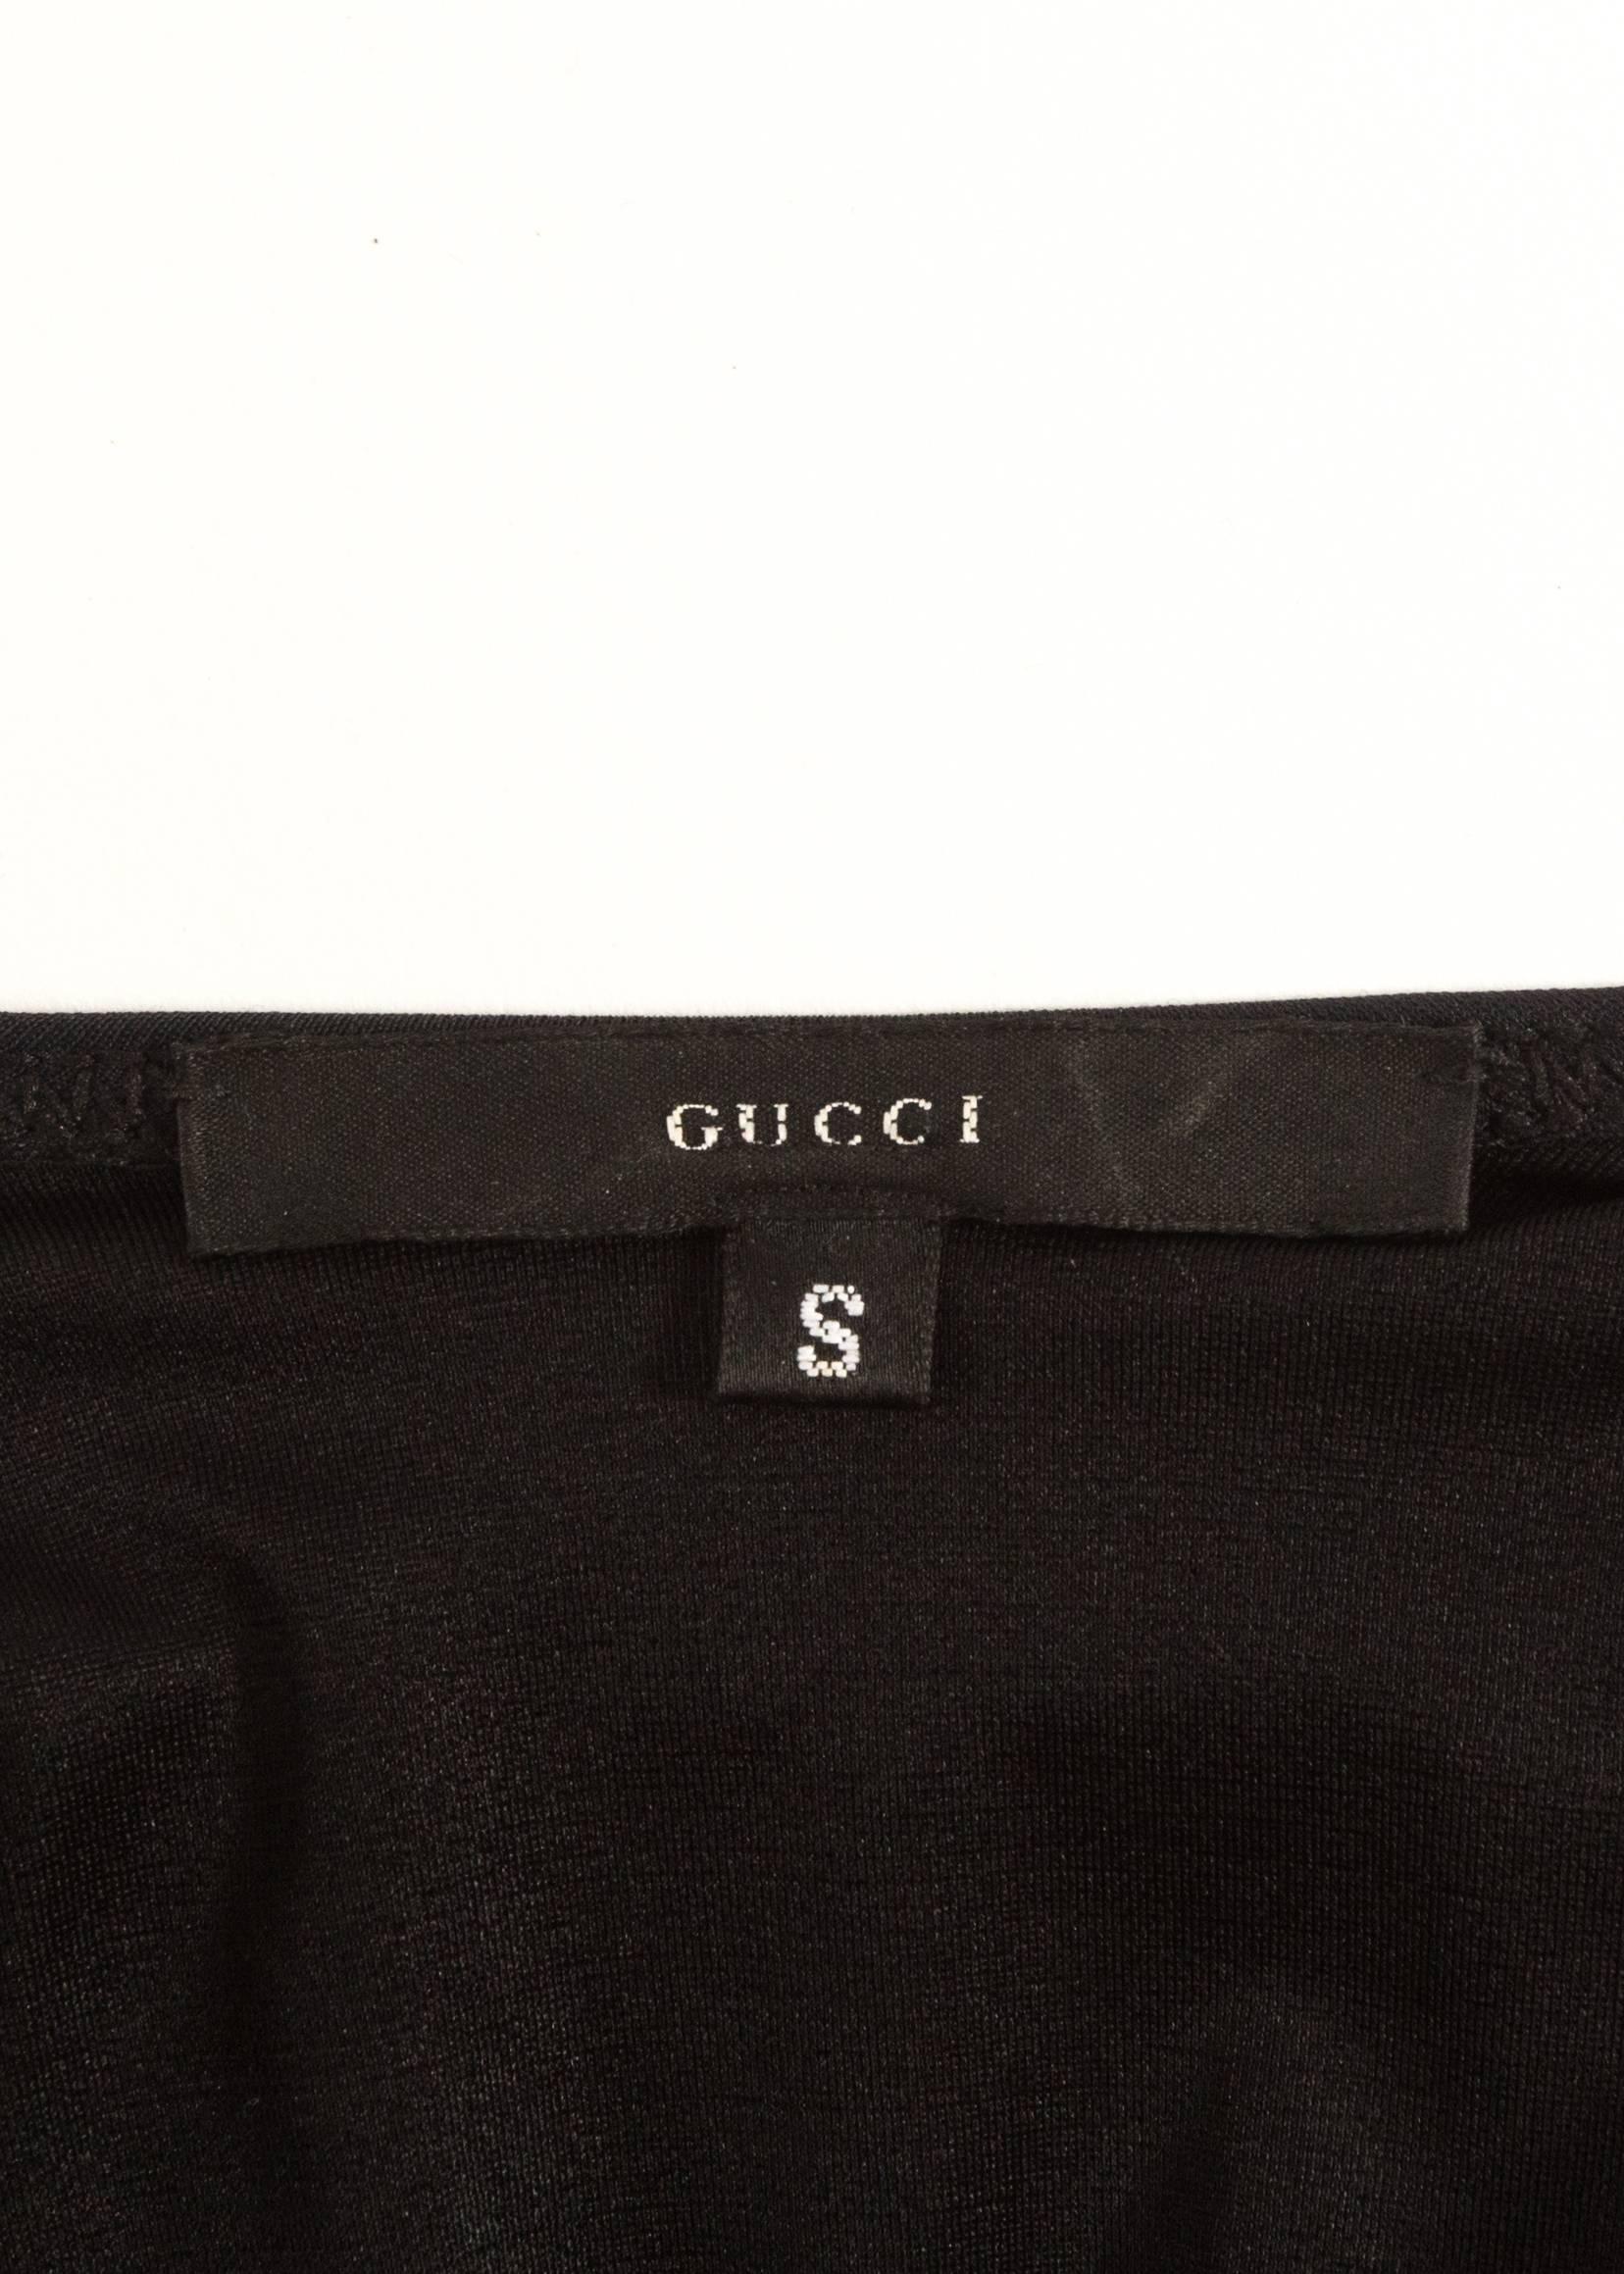 Tom Ford for Gucci Spring-Summer 2000 black halter neck bodysuit  In Excellent Condition In London, GB